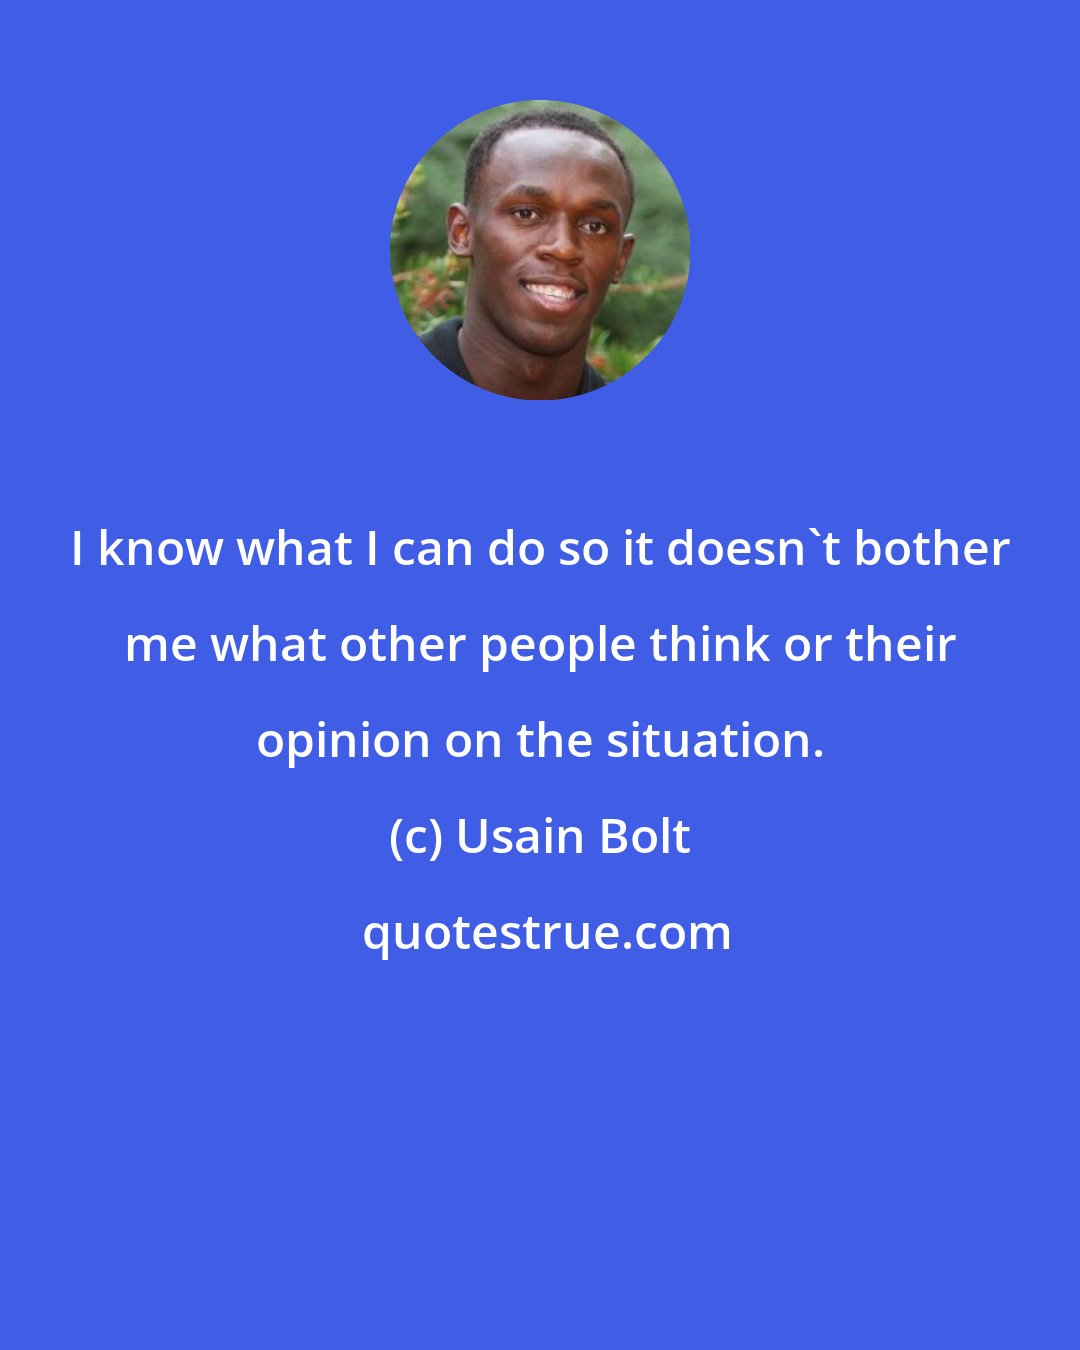 Usain Bolt: I know what I can do so it doesn't bother me what other people think or their opinion on the situation.